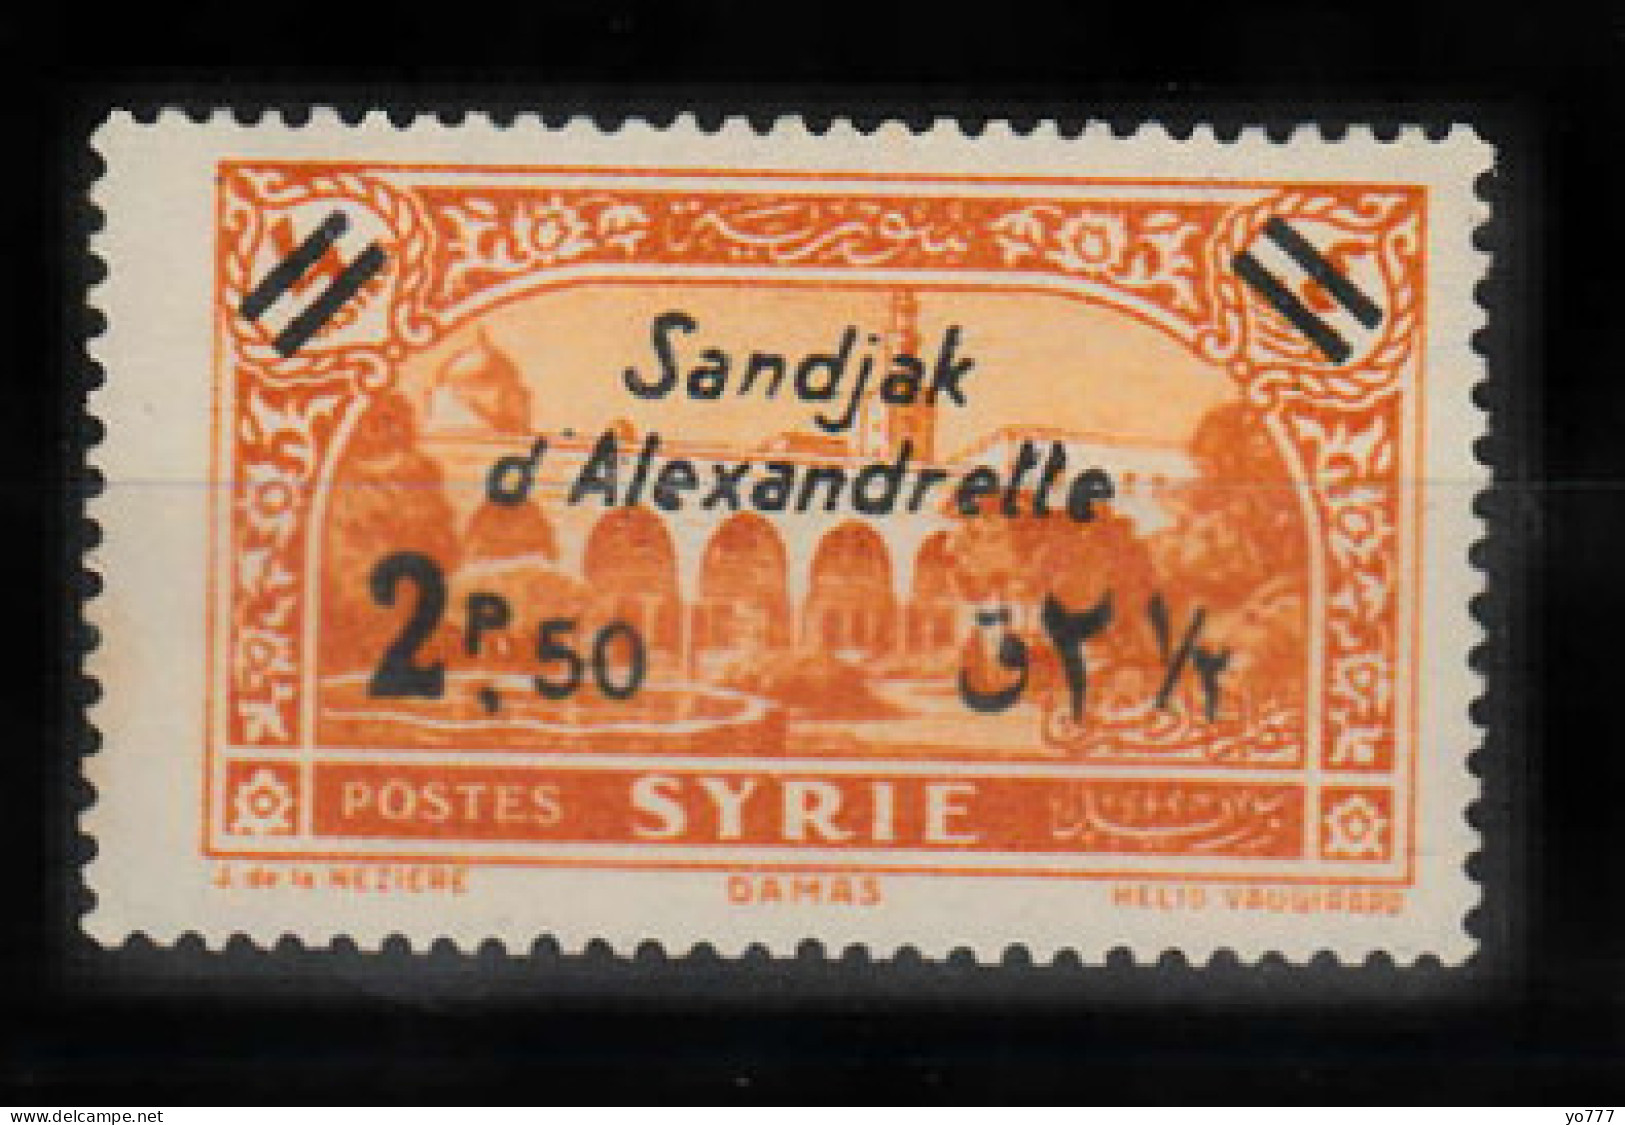 (H-011) 1938 HATAY STAMPS WITH BLACK SANDJAK D'ALEXANDRETTE SURCHARGE ON SYRIA POSTAGE AIRPOST STAMPS MH* NO GUM - 1934-39 Sandjak Alexandrette & Hatay